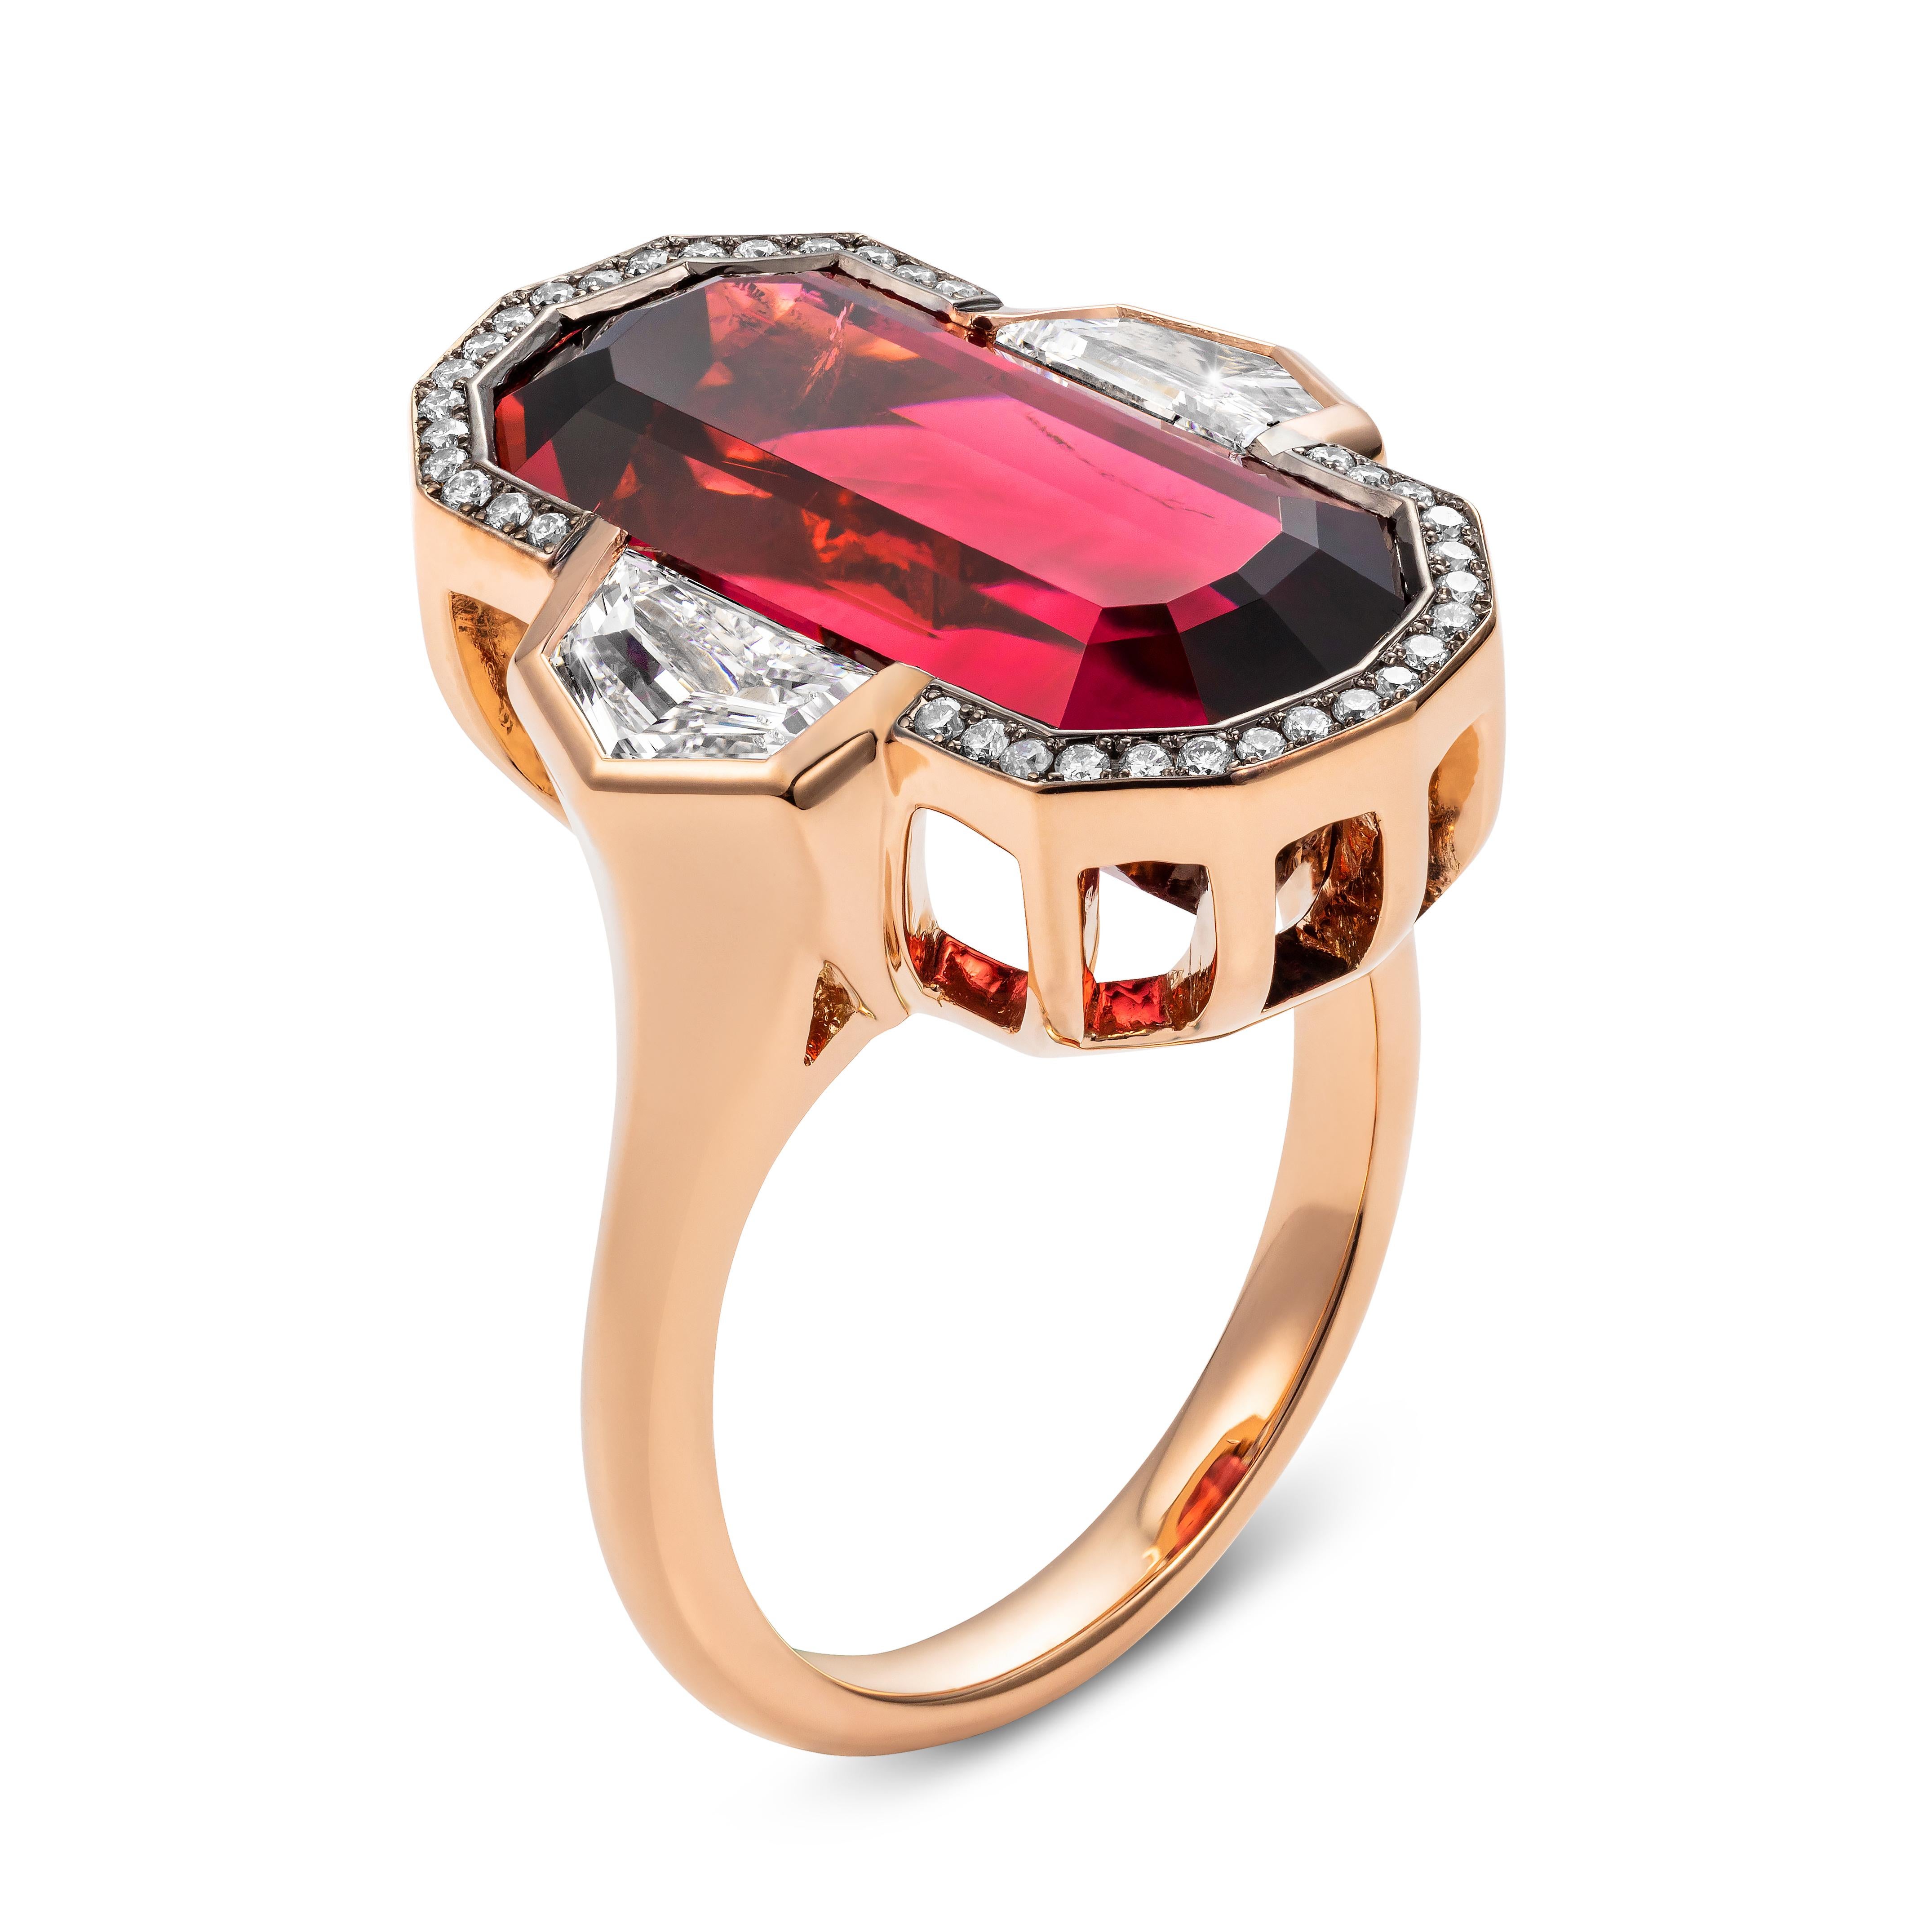 A new addition to our one off designs.  This spectacular ring has striking looks yet everything about it is balanced.  Set seamlessly within the metal, the rubellite tourmaline interacts with the shoulder diamonds creating an angular but flowing